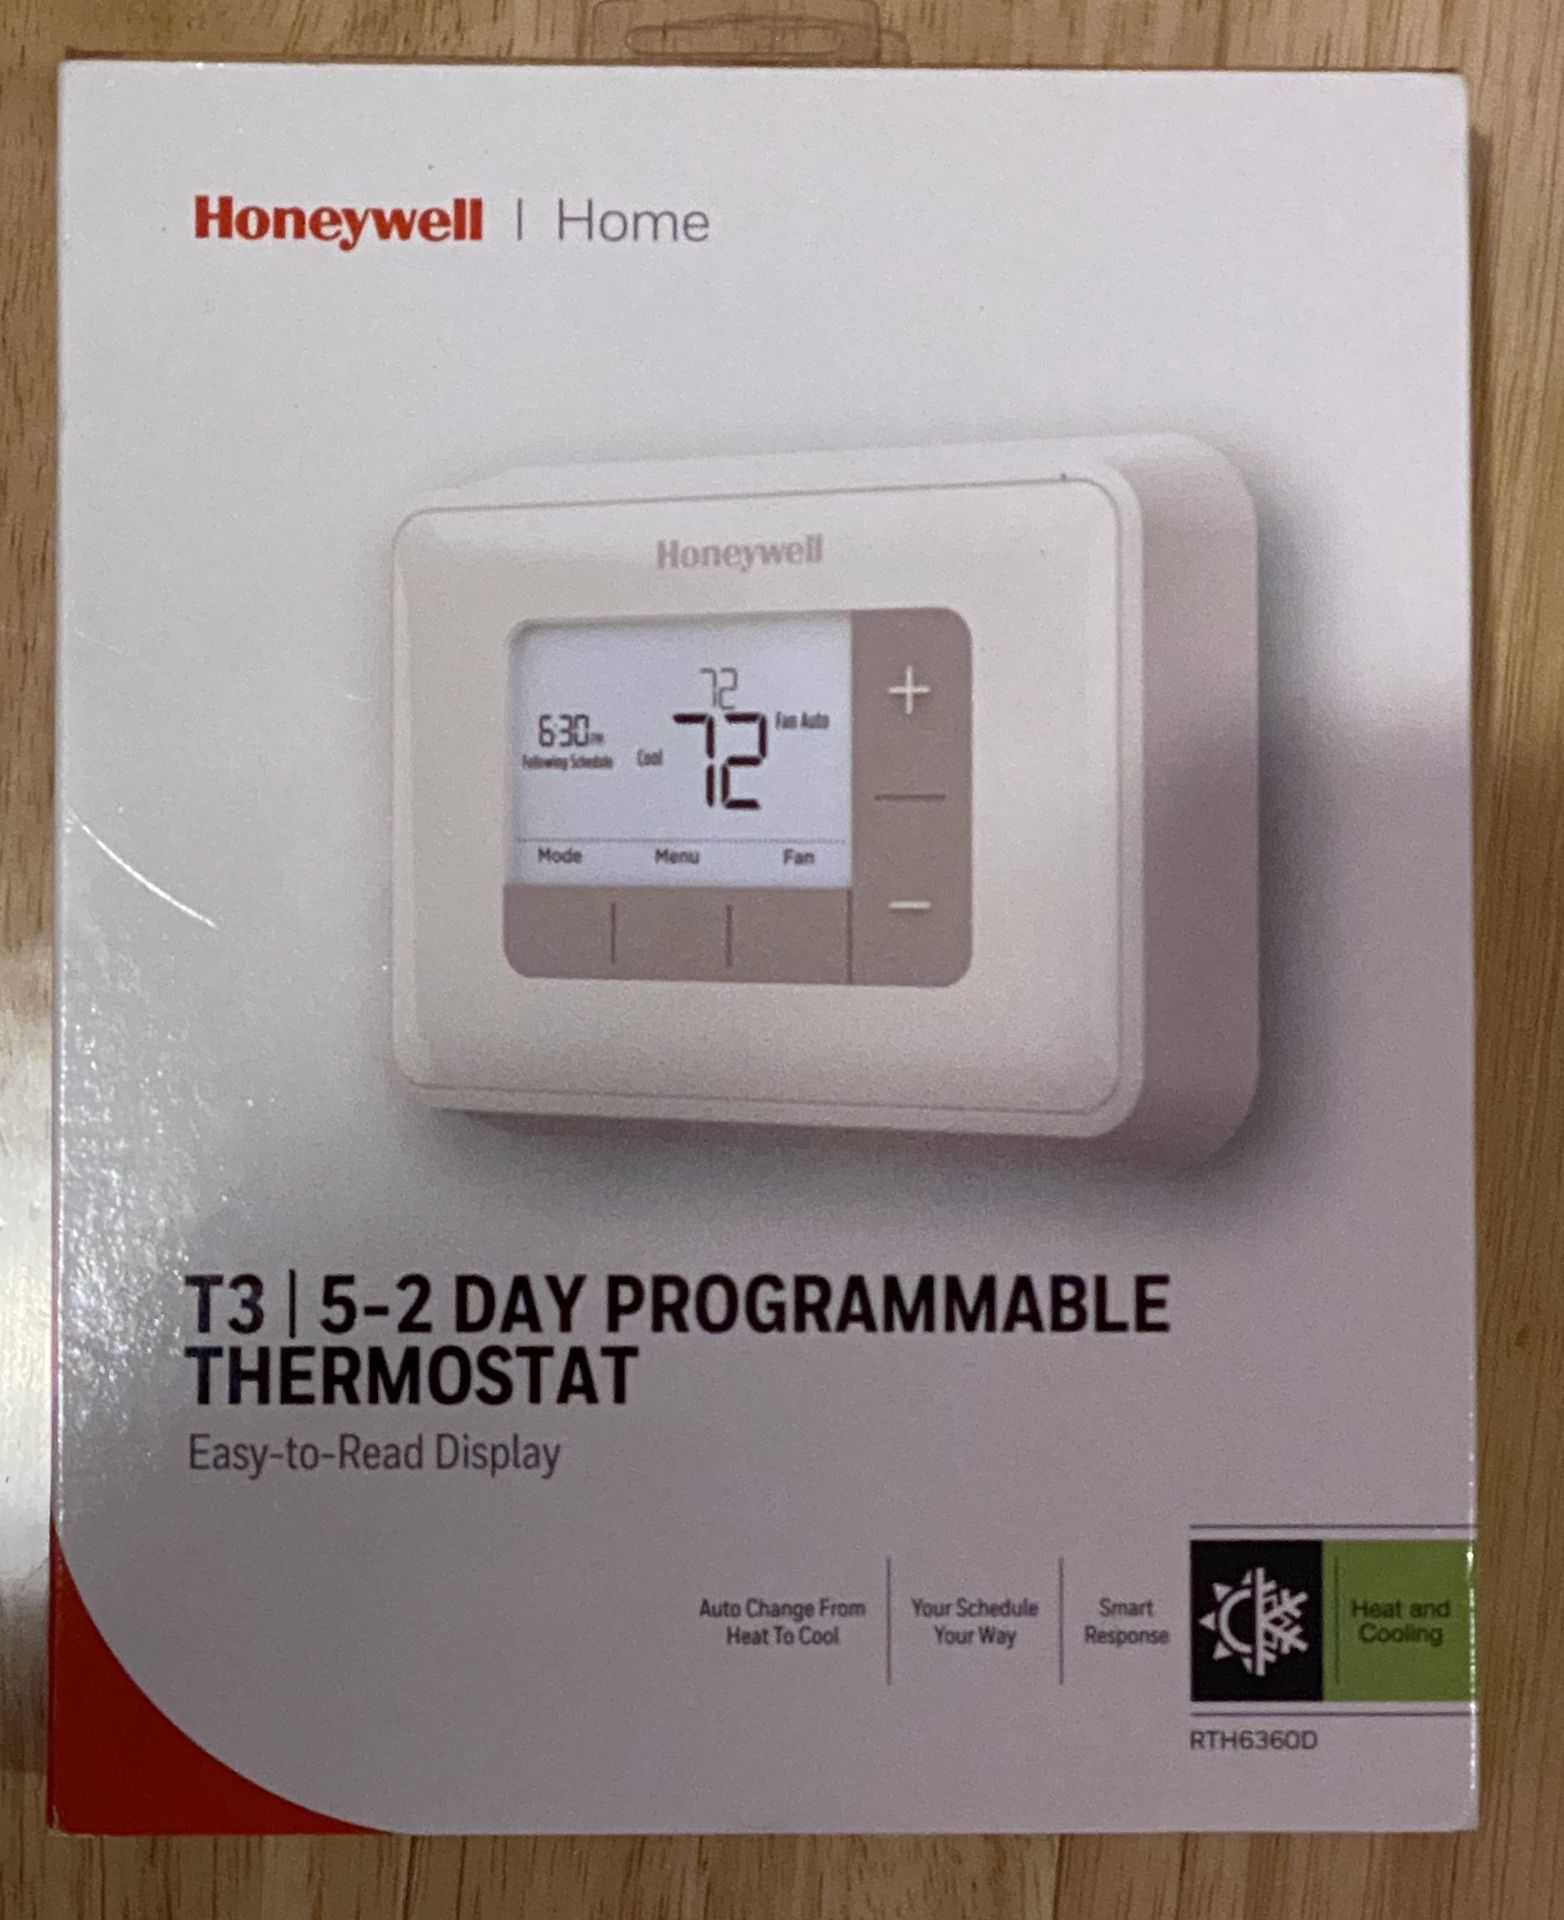 Brand New Honeywell 5-2 Day Programmable Thermostat